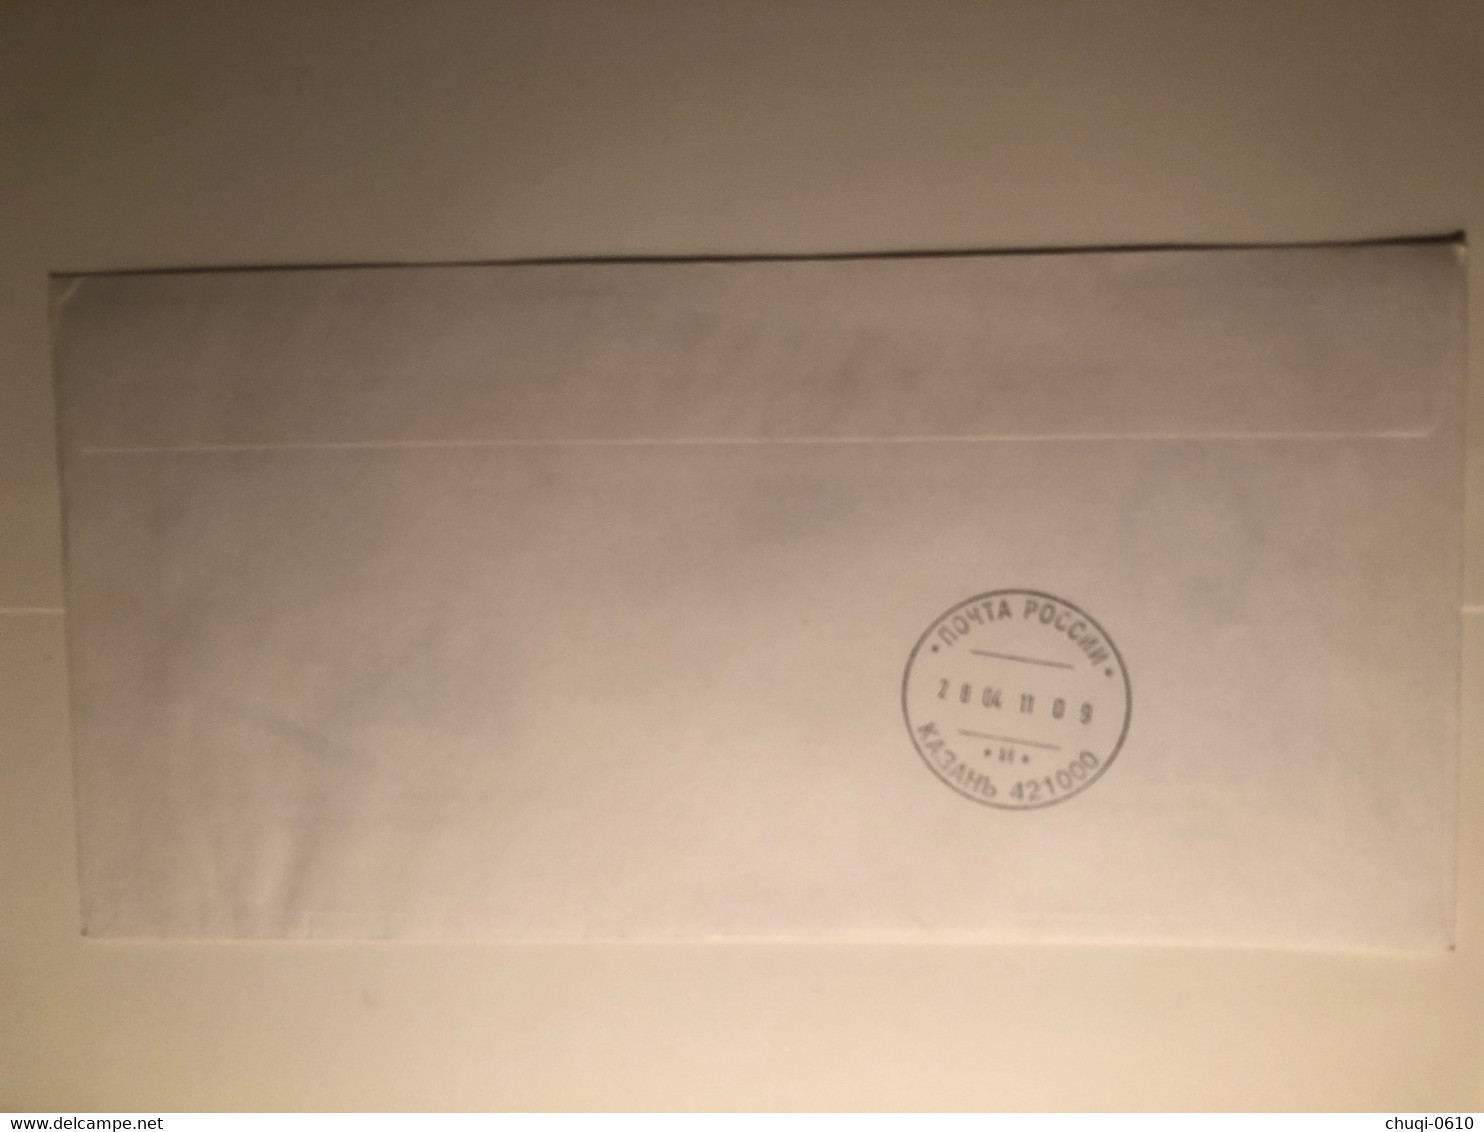 Russia Posted Cover With Stamps - Covers & Documents